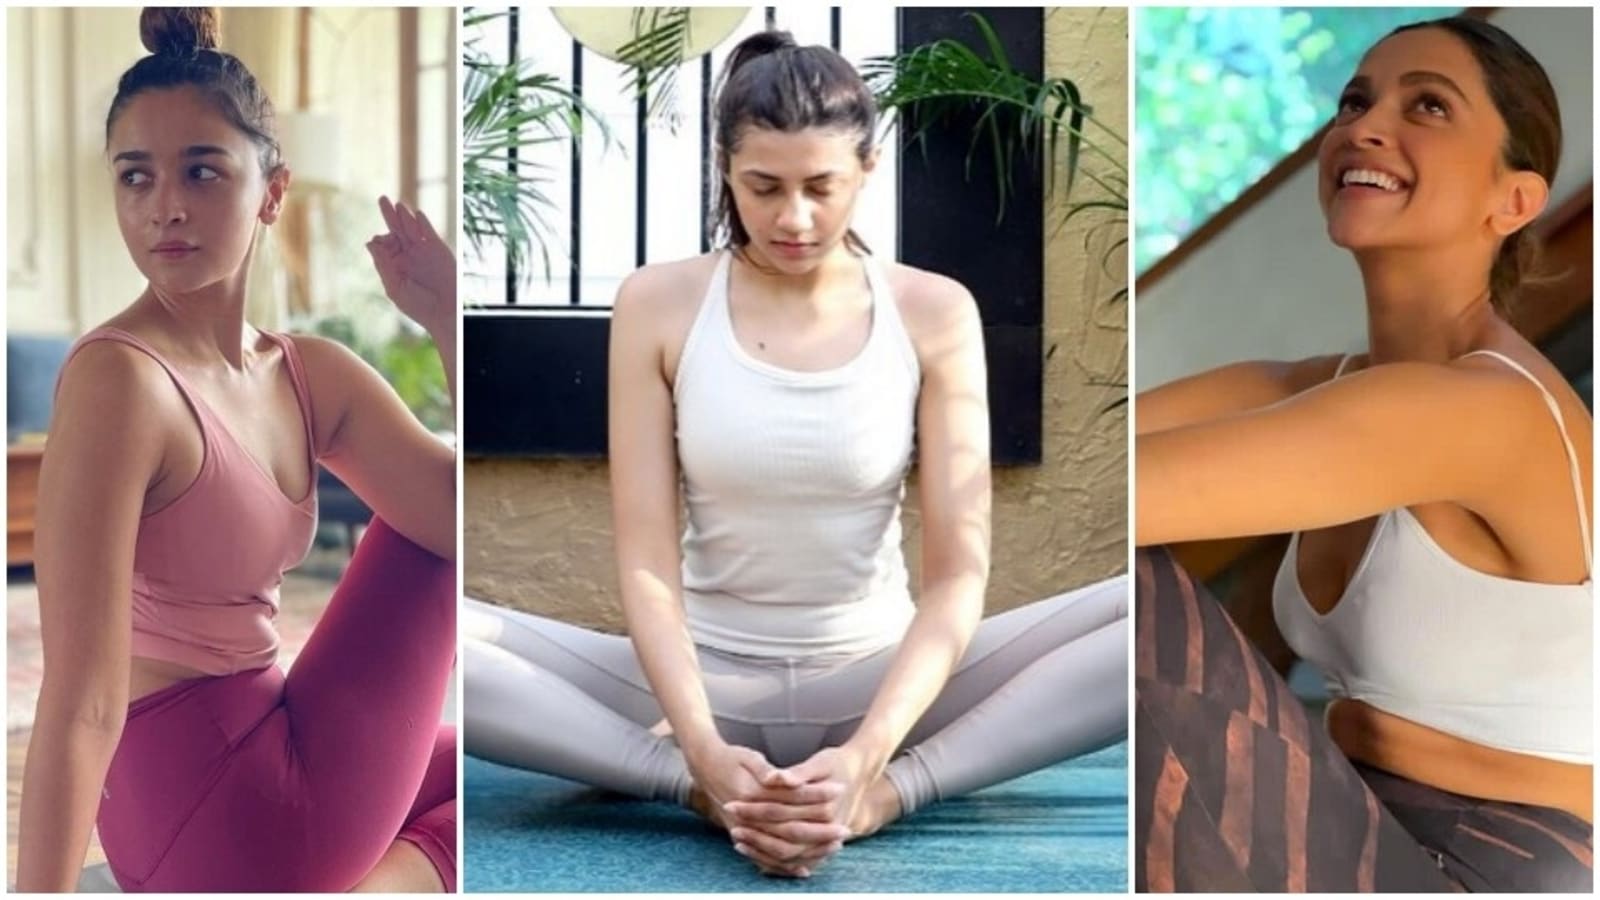 Benefits of prenatal yoga 10 prenatal yoga poses for women to do during  pregnancy and their benefits, according to Geeta Basra, experts